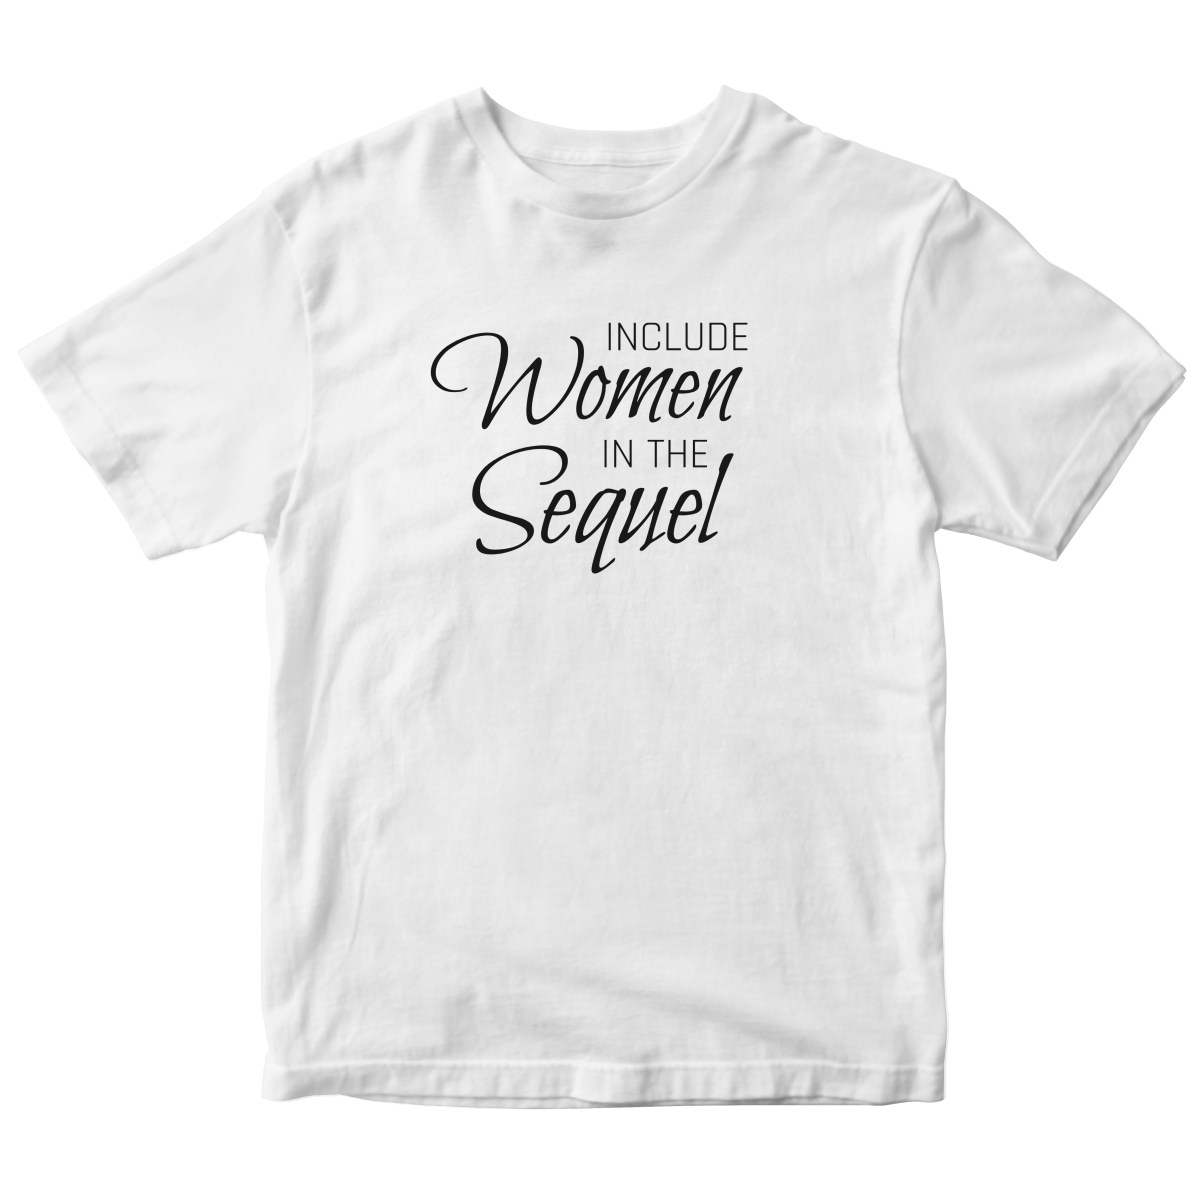 Include Women In the Sequel Kids T-shirt | White